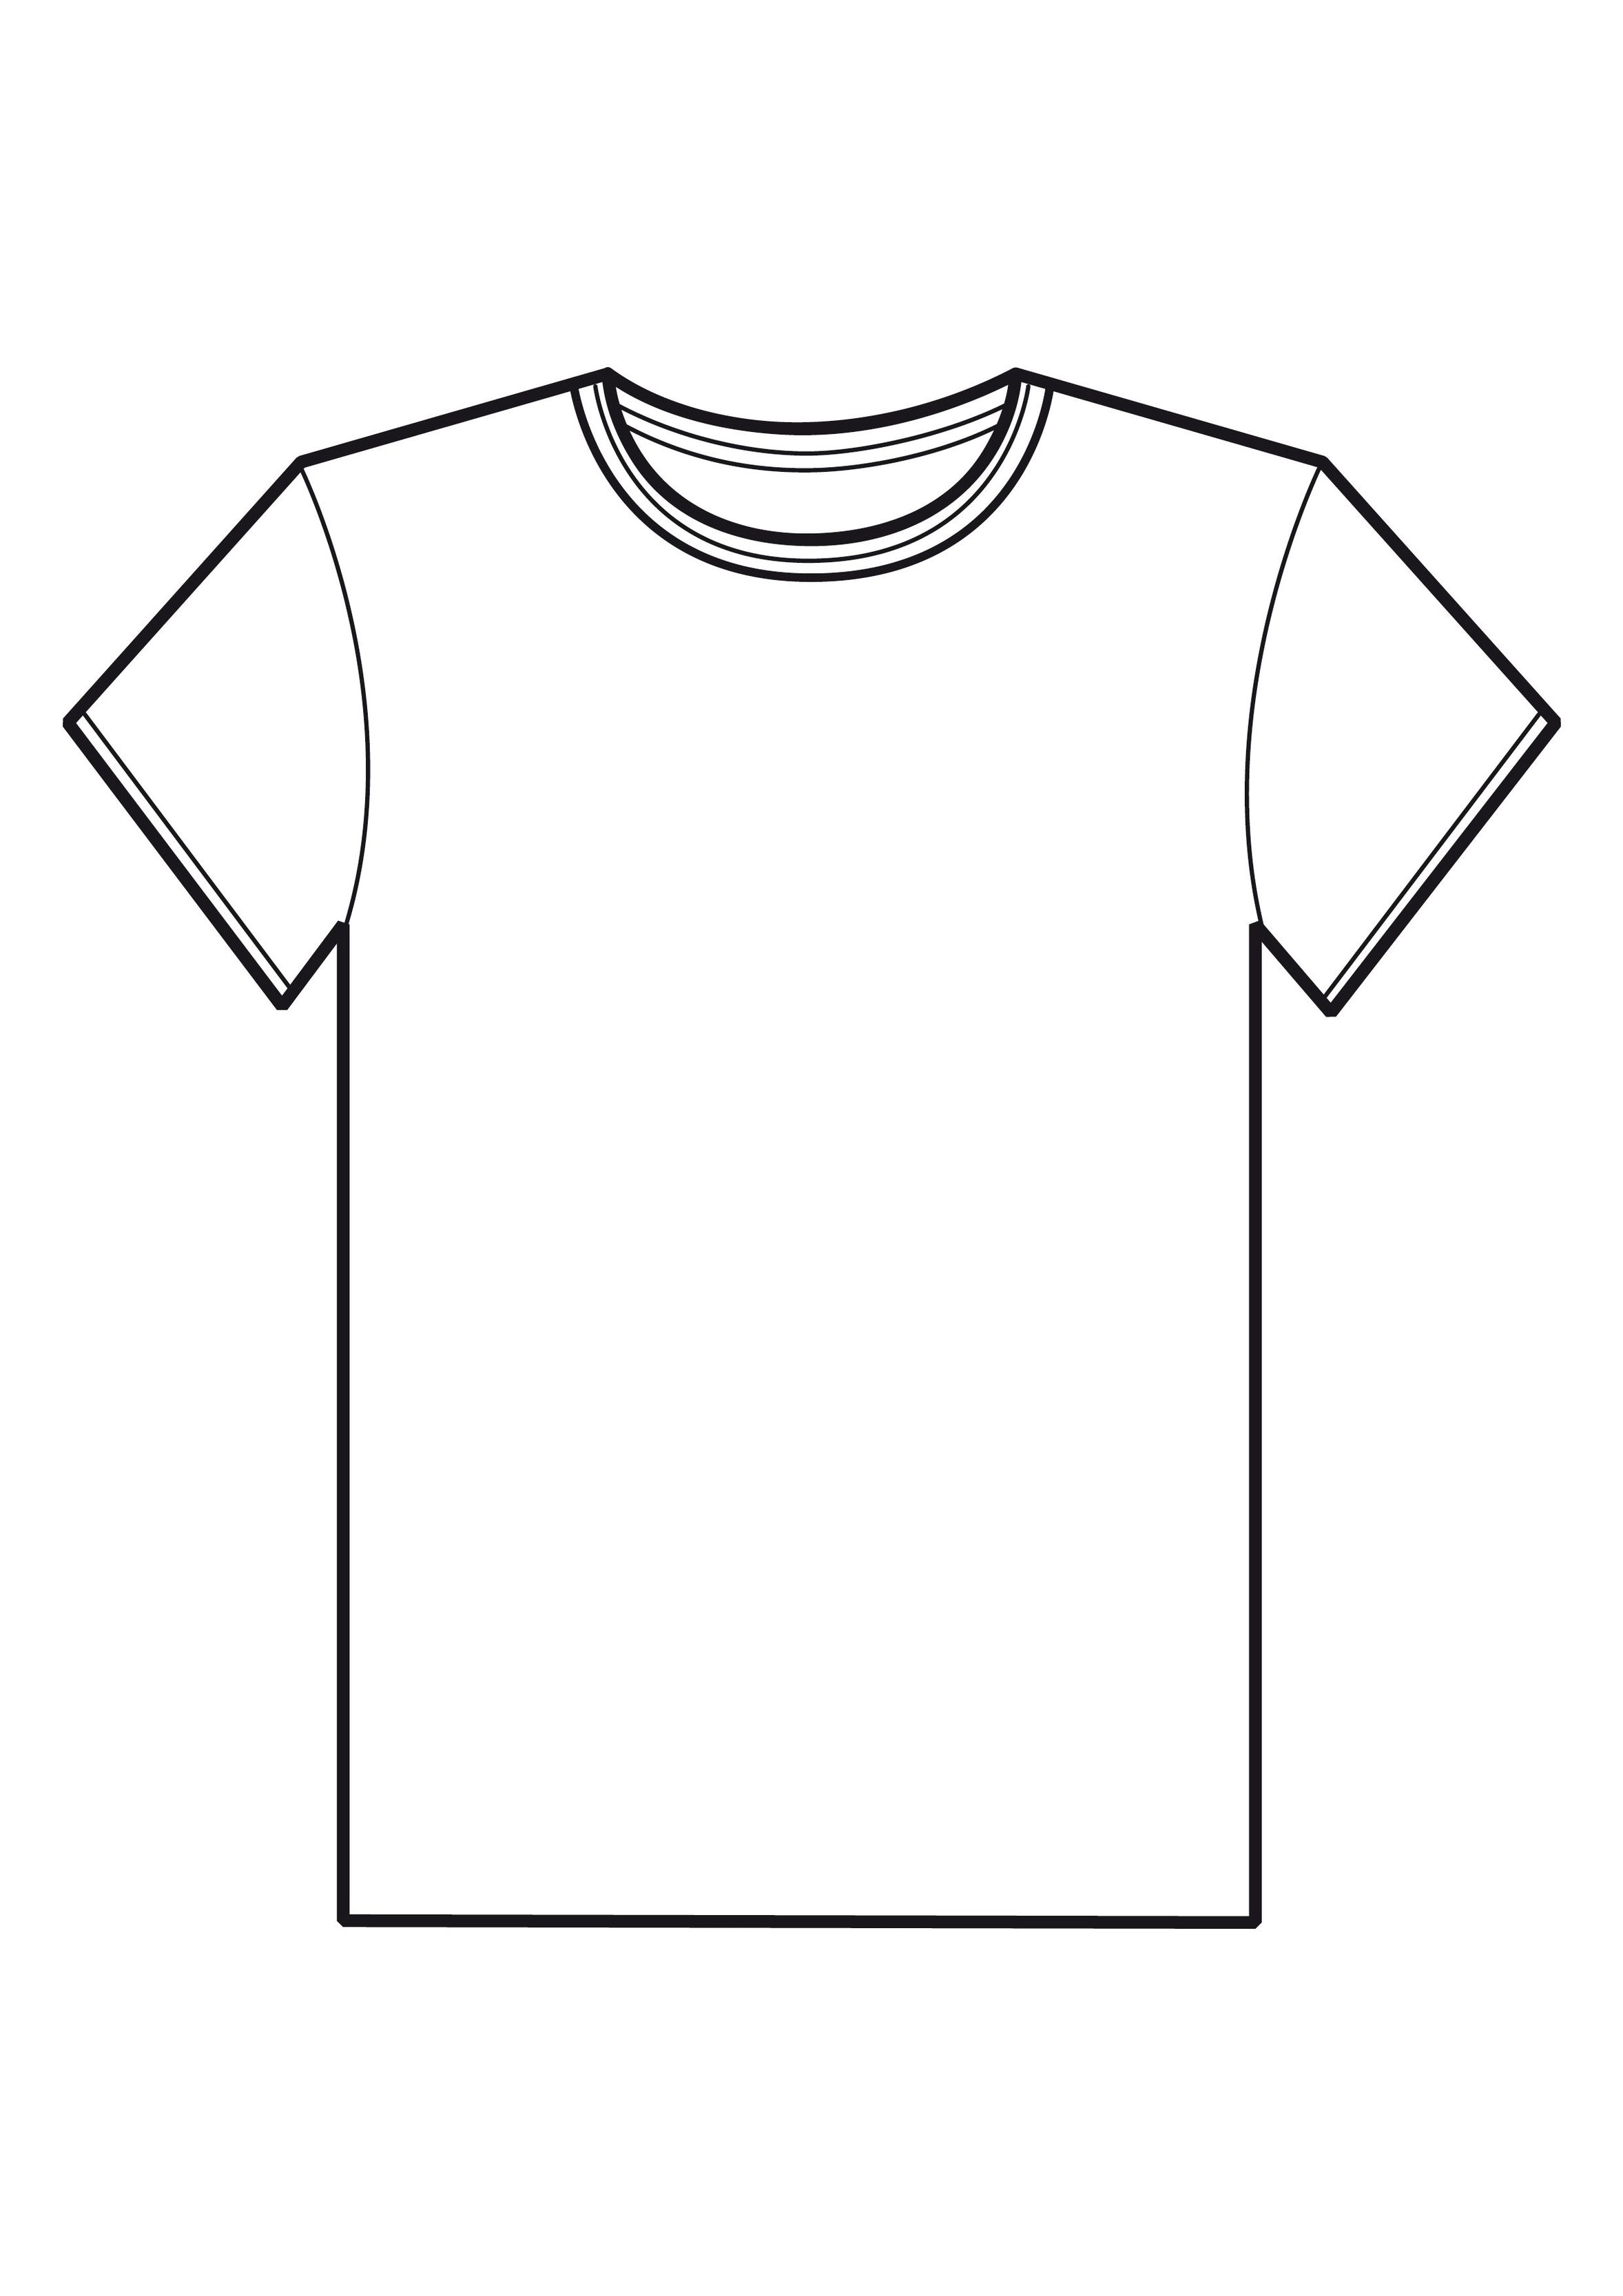 T-shirt picture of a white shirt clipart free to use clip art resource